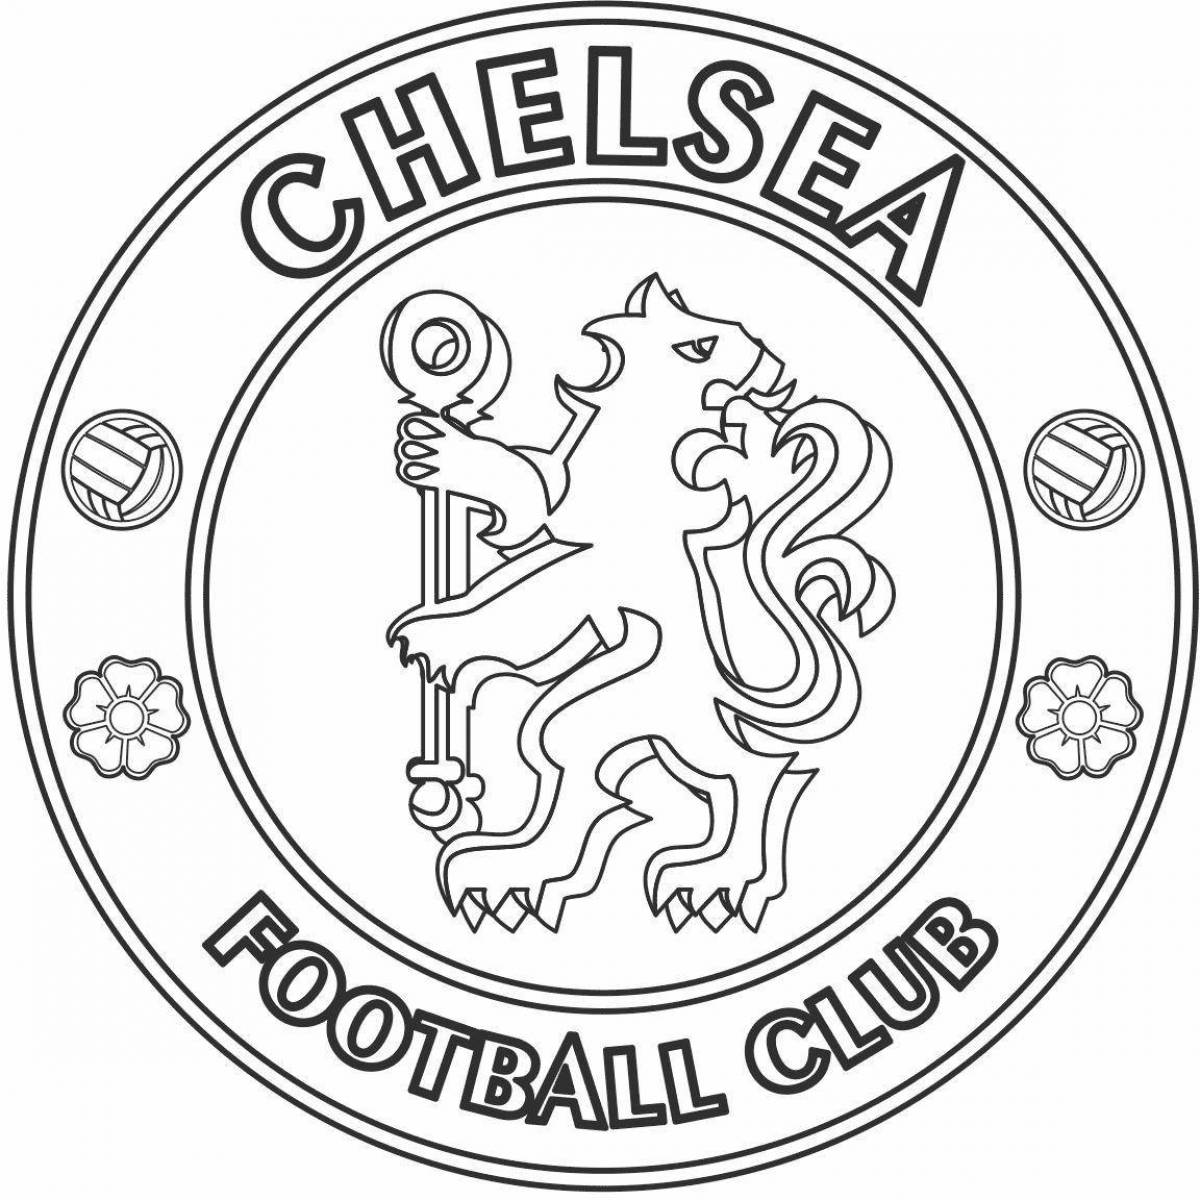 Great manchester united coloring page